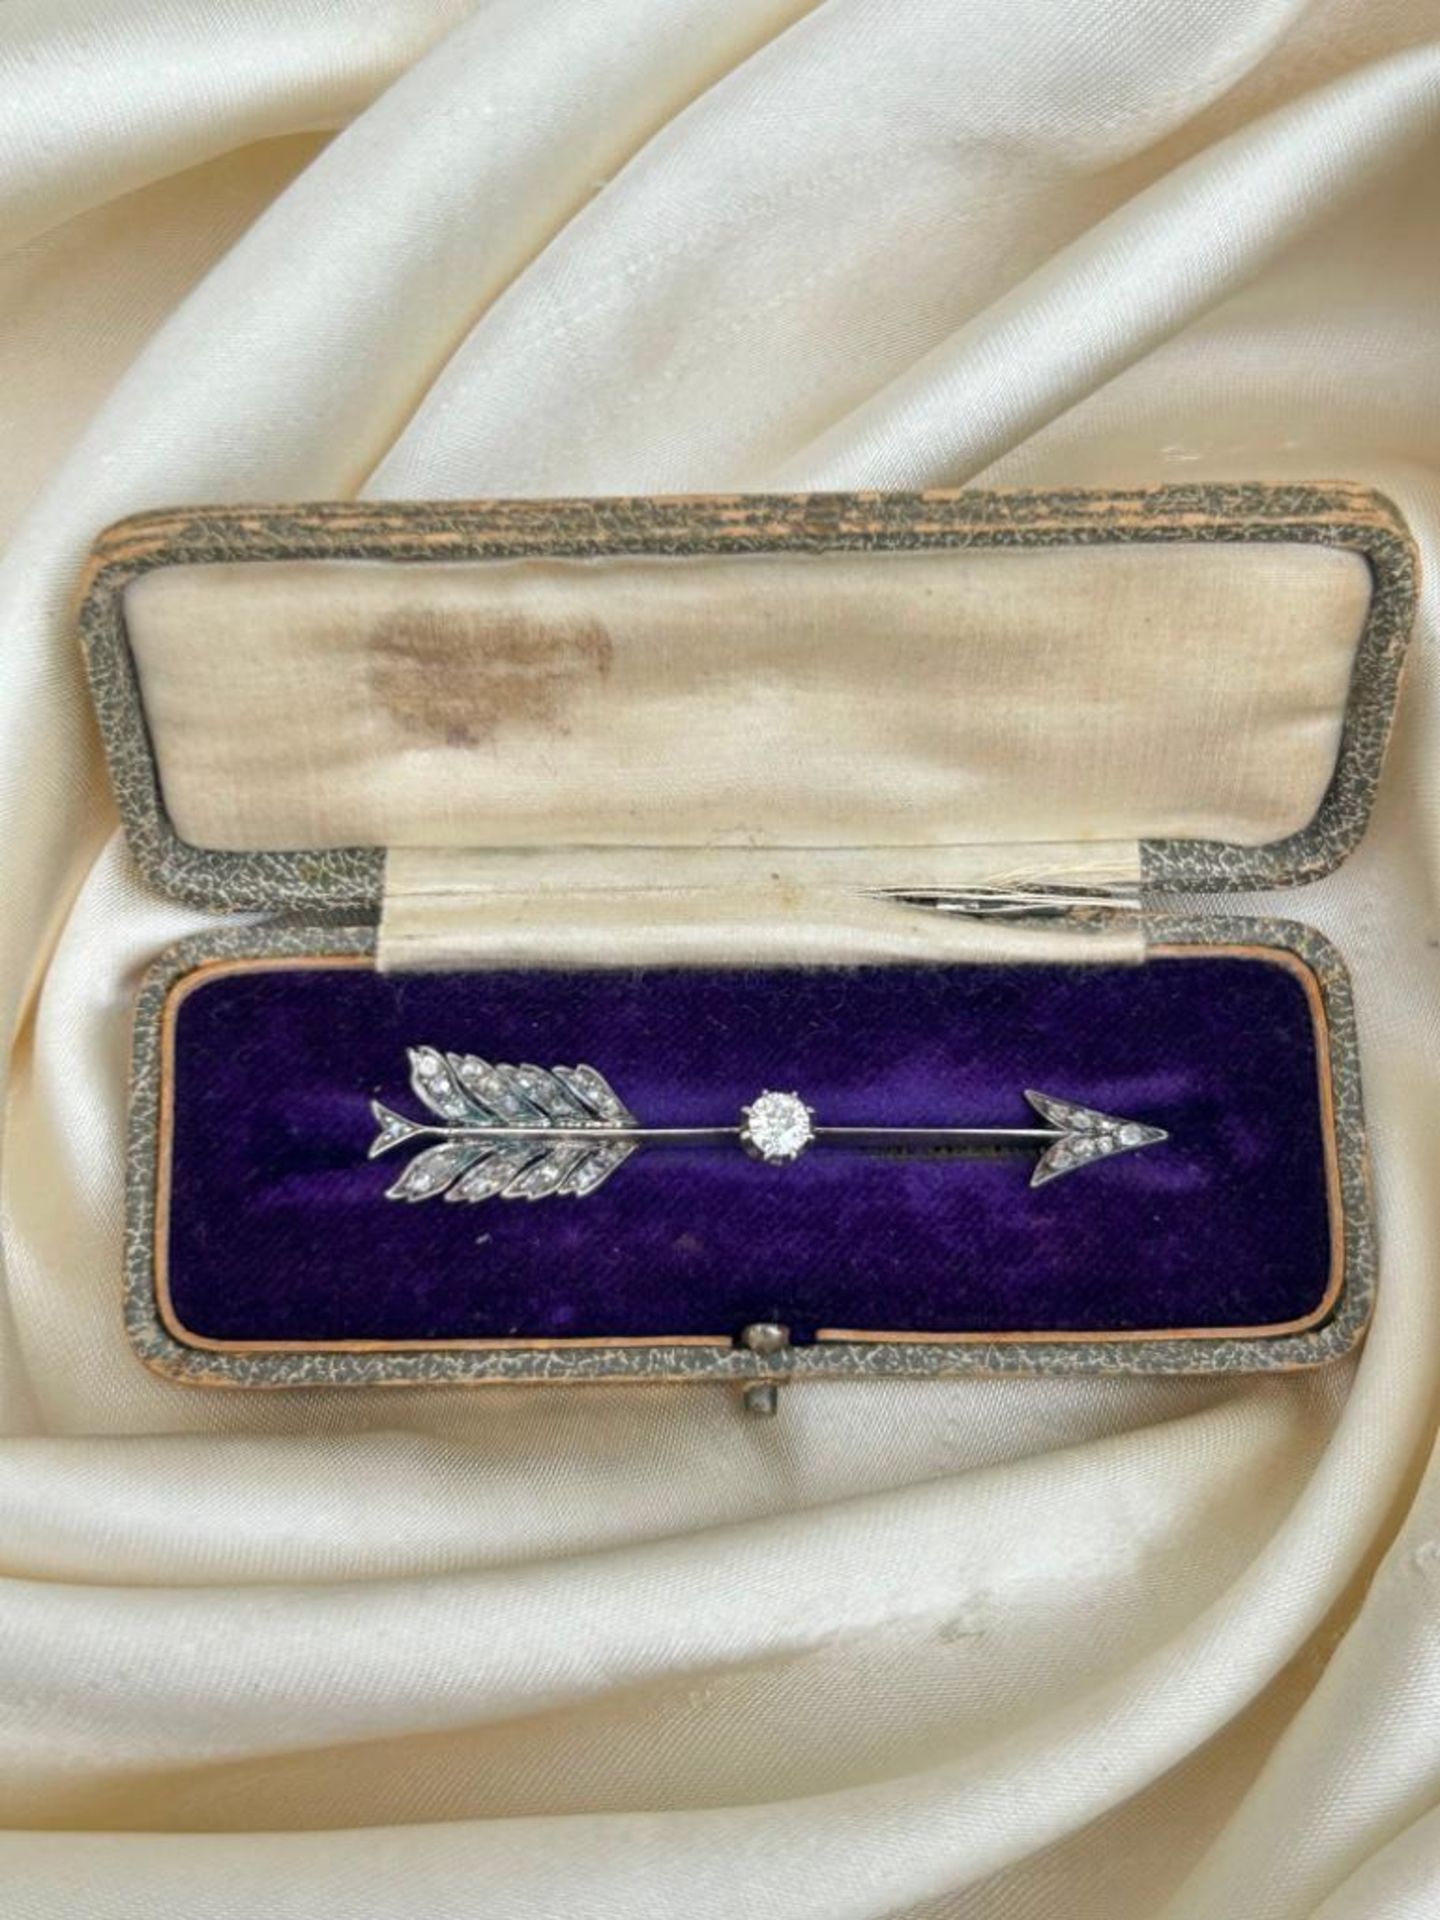 Outstanding Antique Large Diamond Jabot Arrow Pin Brooch in Antique Box - Image 3 of 8